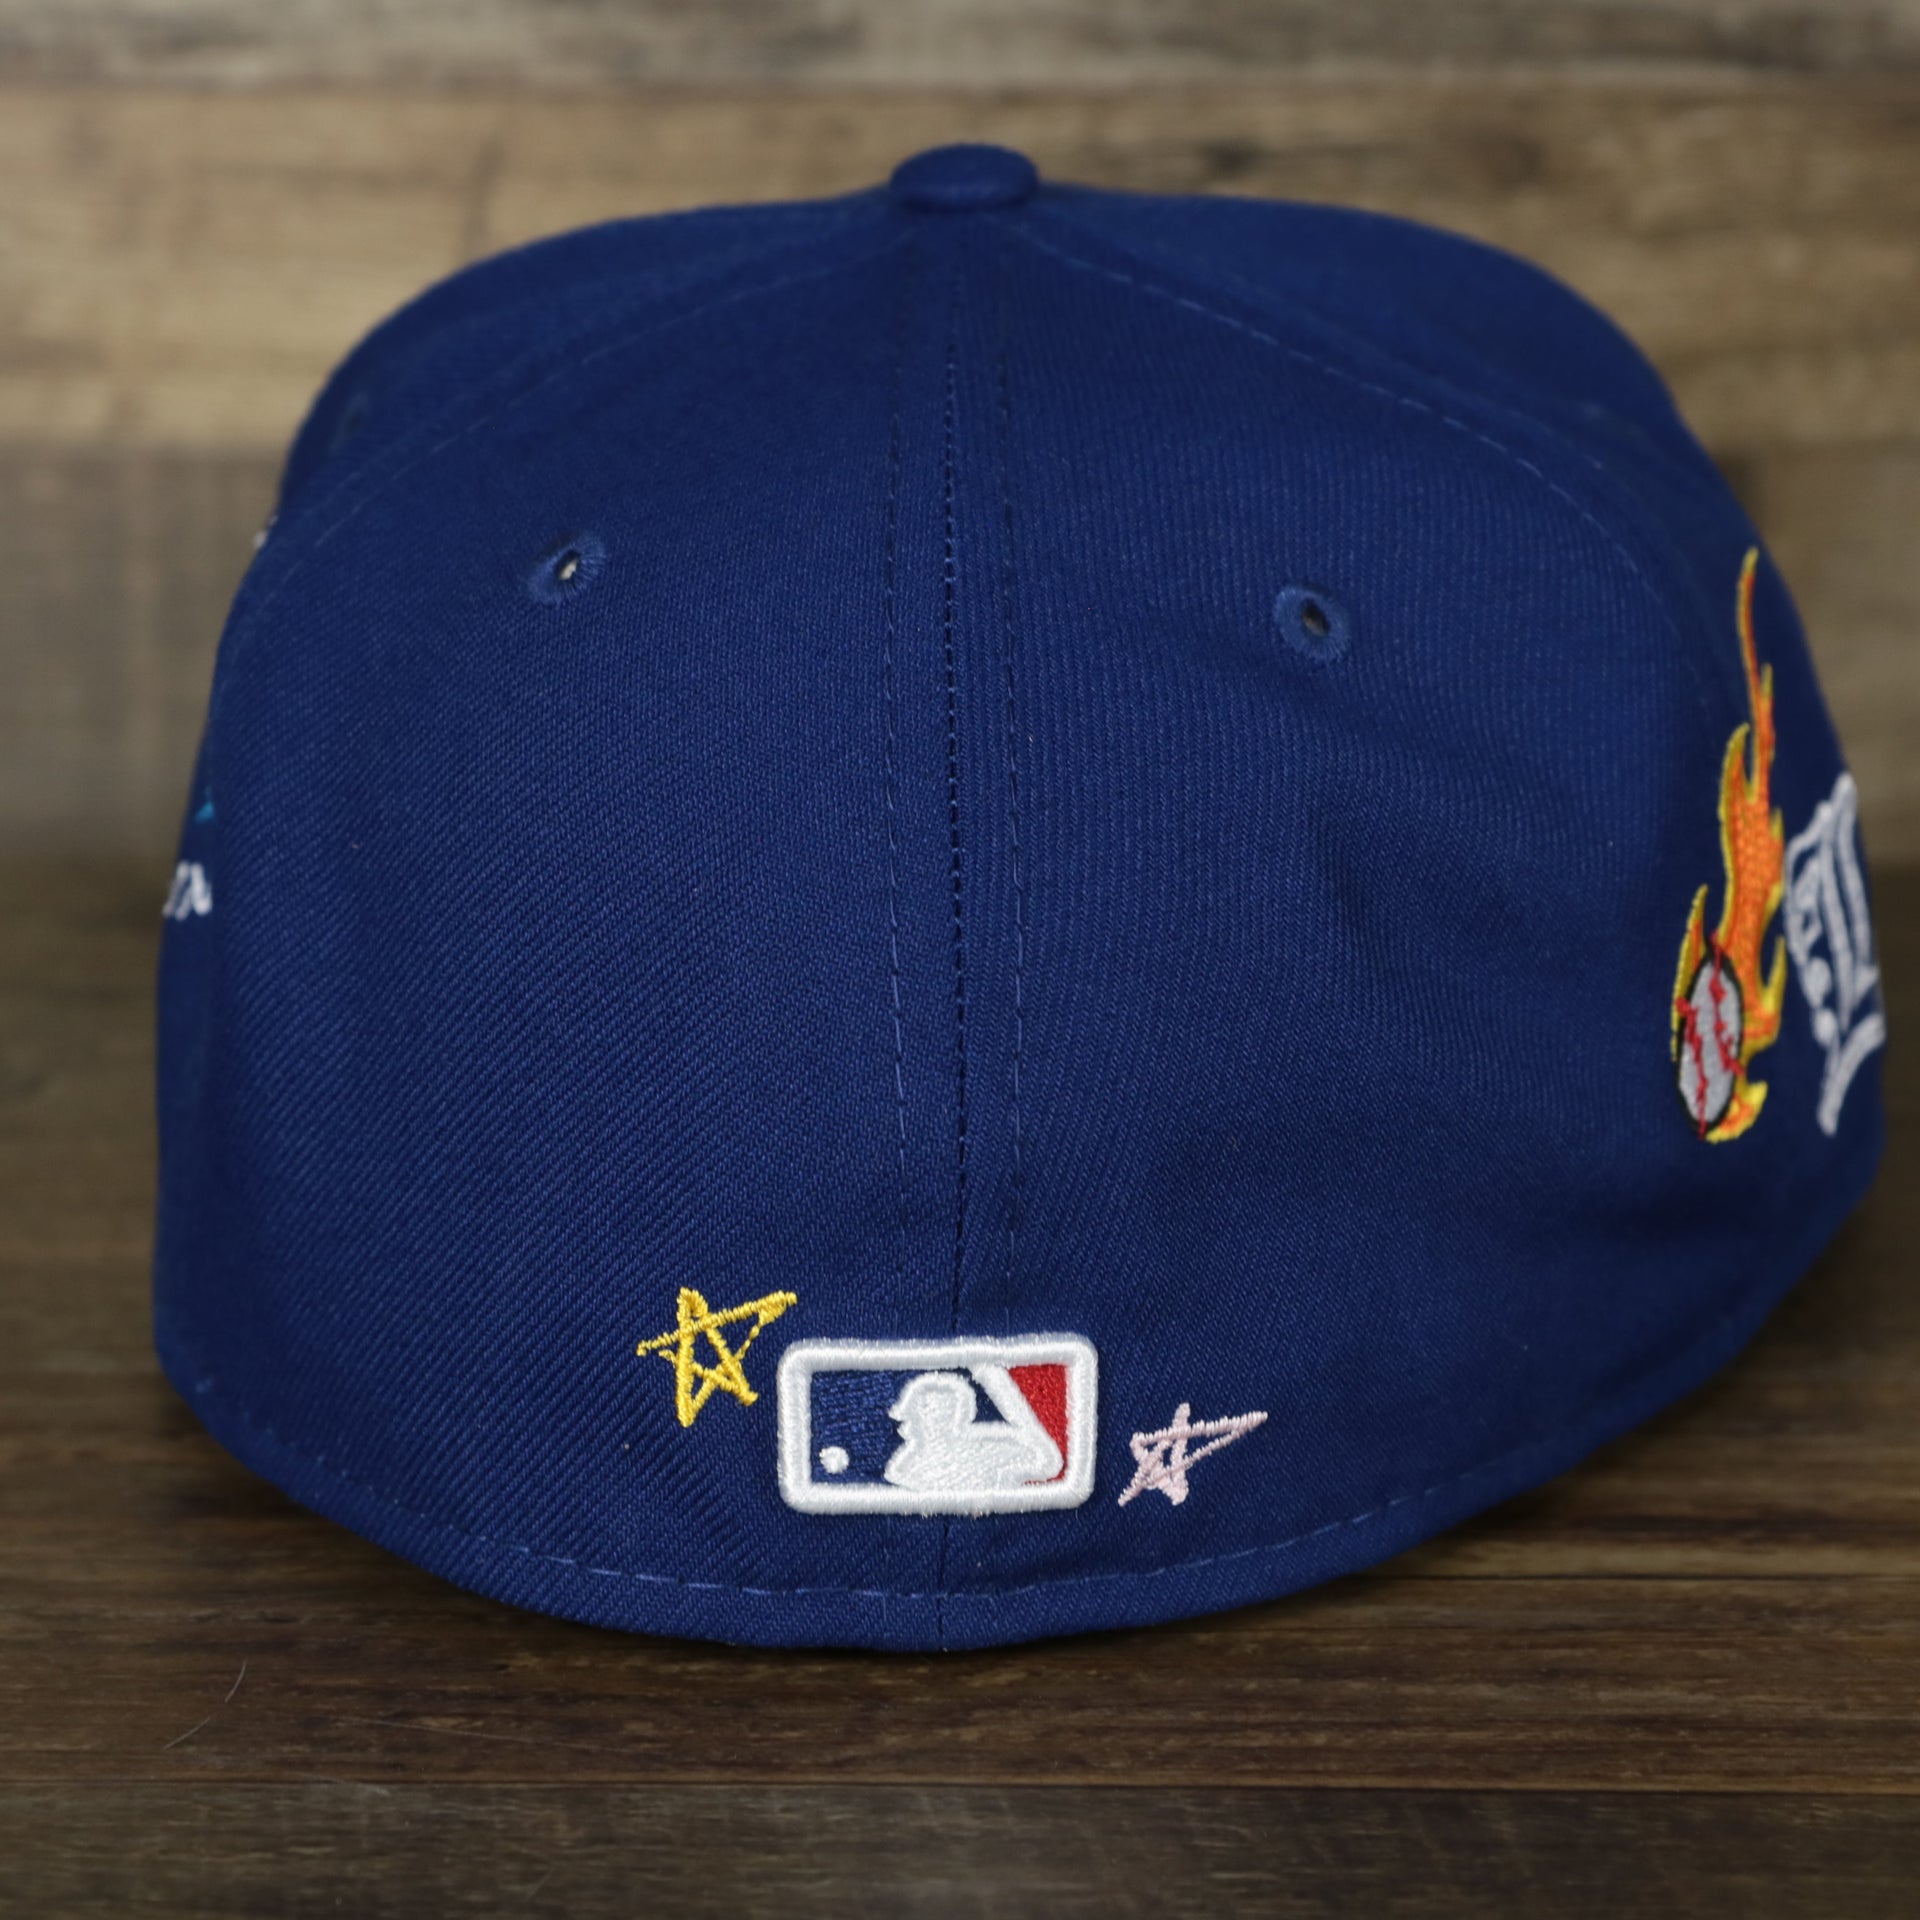 The back of the Los Angeles Dodgers “Scribble” Side Patch Gray Bottom 59Fifty Fitted Cap